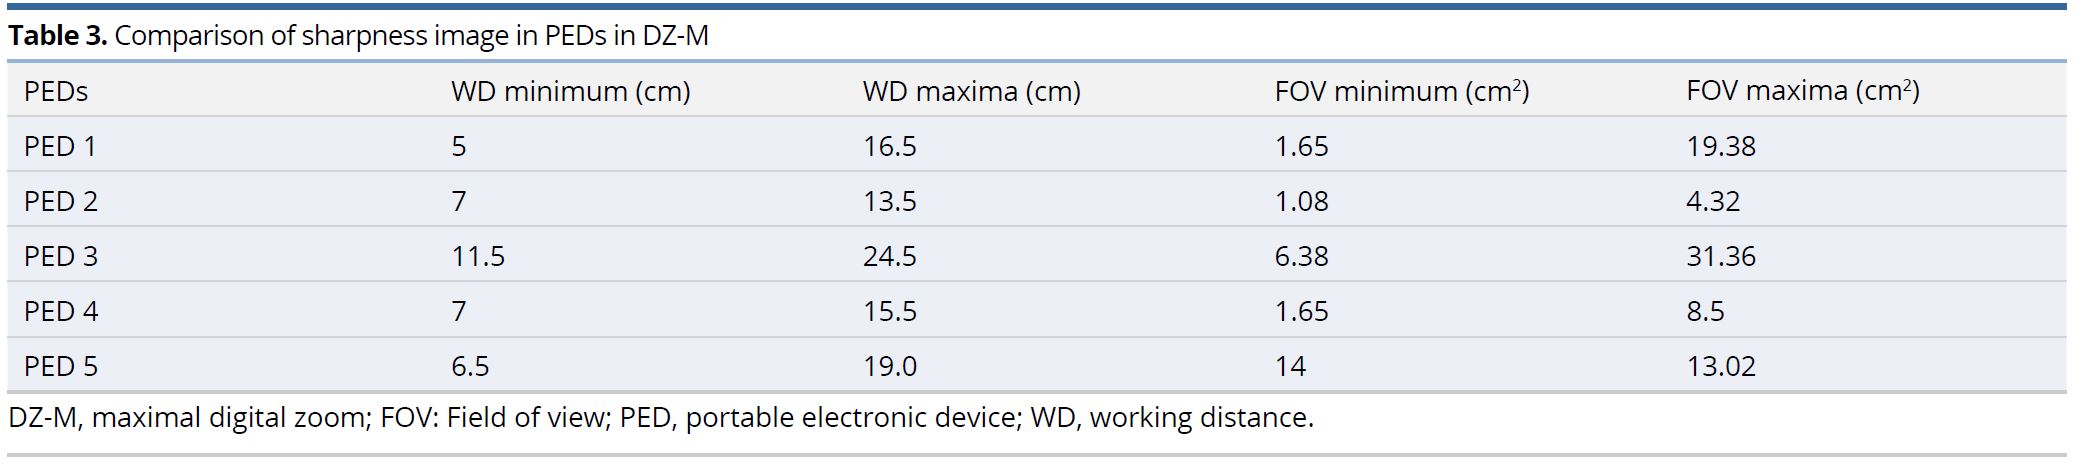 Table 3.JPGComparison of sharpness image in PEDs in DZ-M.